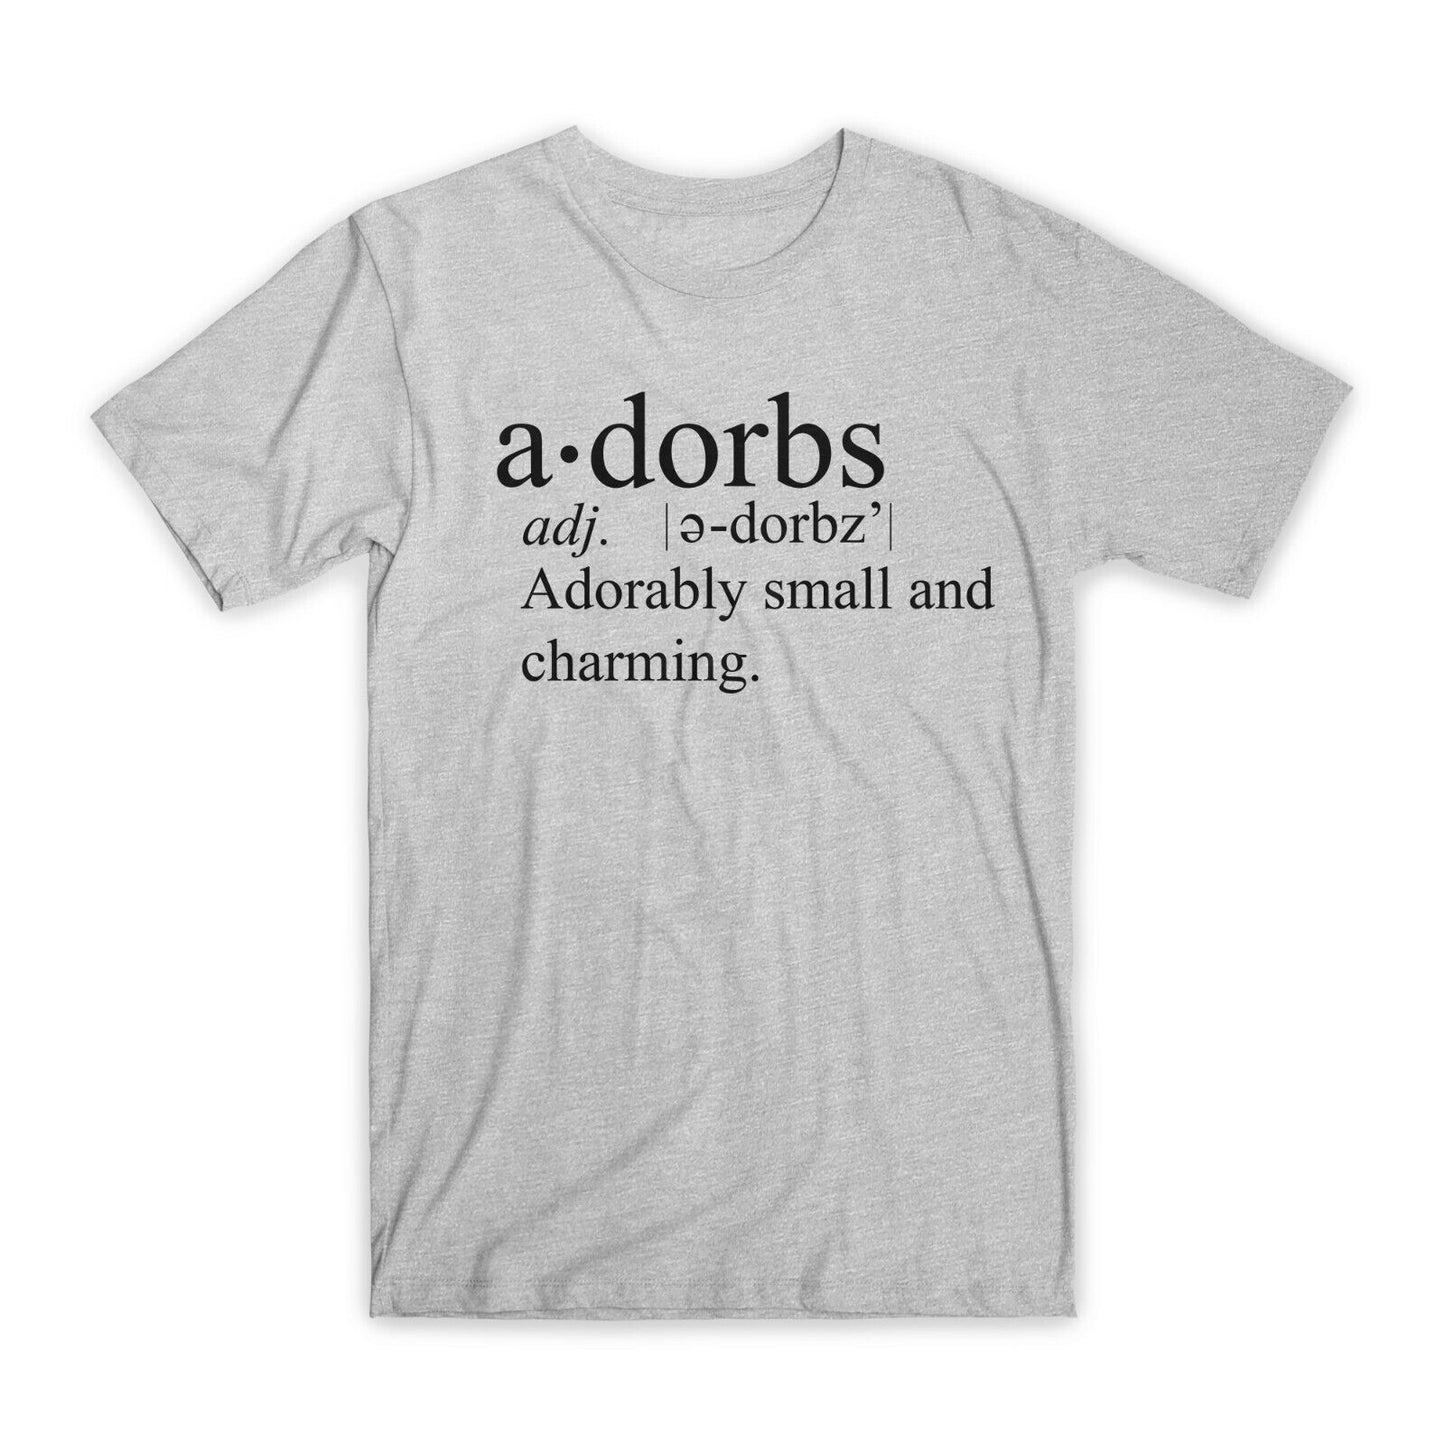 Adorably Small and Charming T-Shirt Premium Cotton Crew Neck Funny Tee Gift NEW